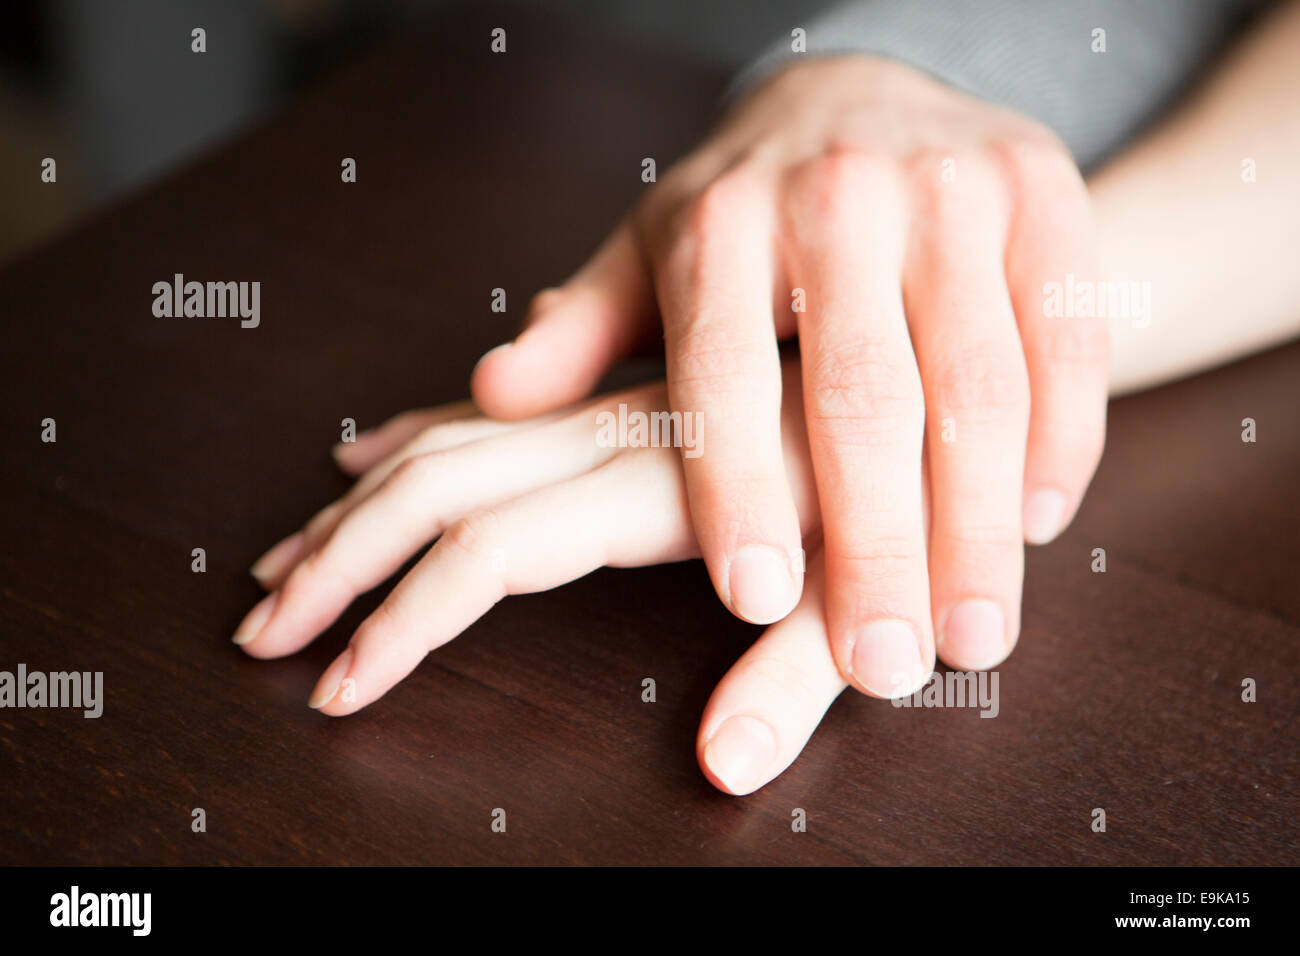 Loving couple's hands on table Stock Photo